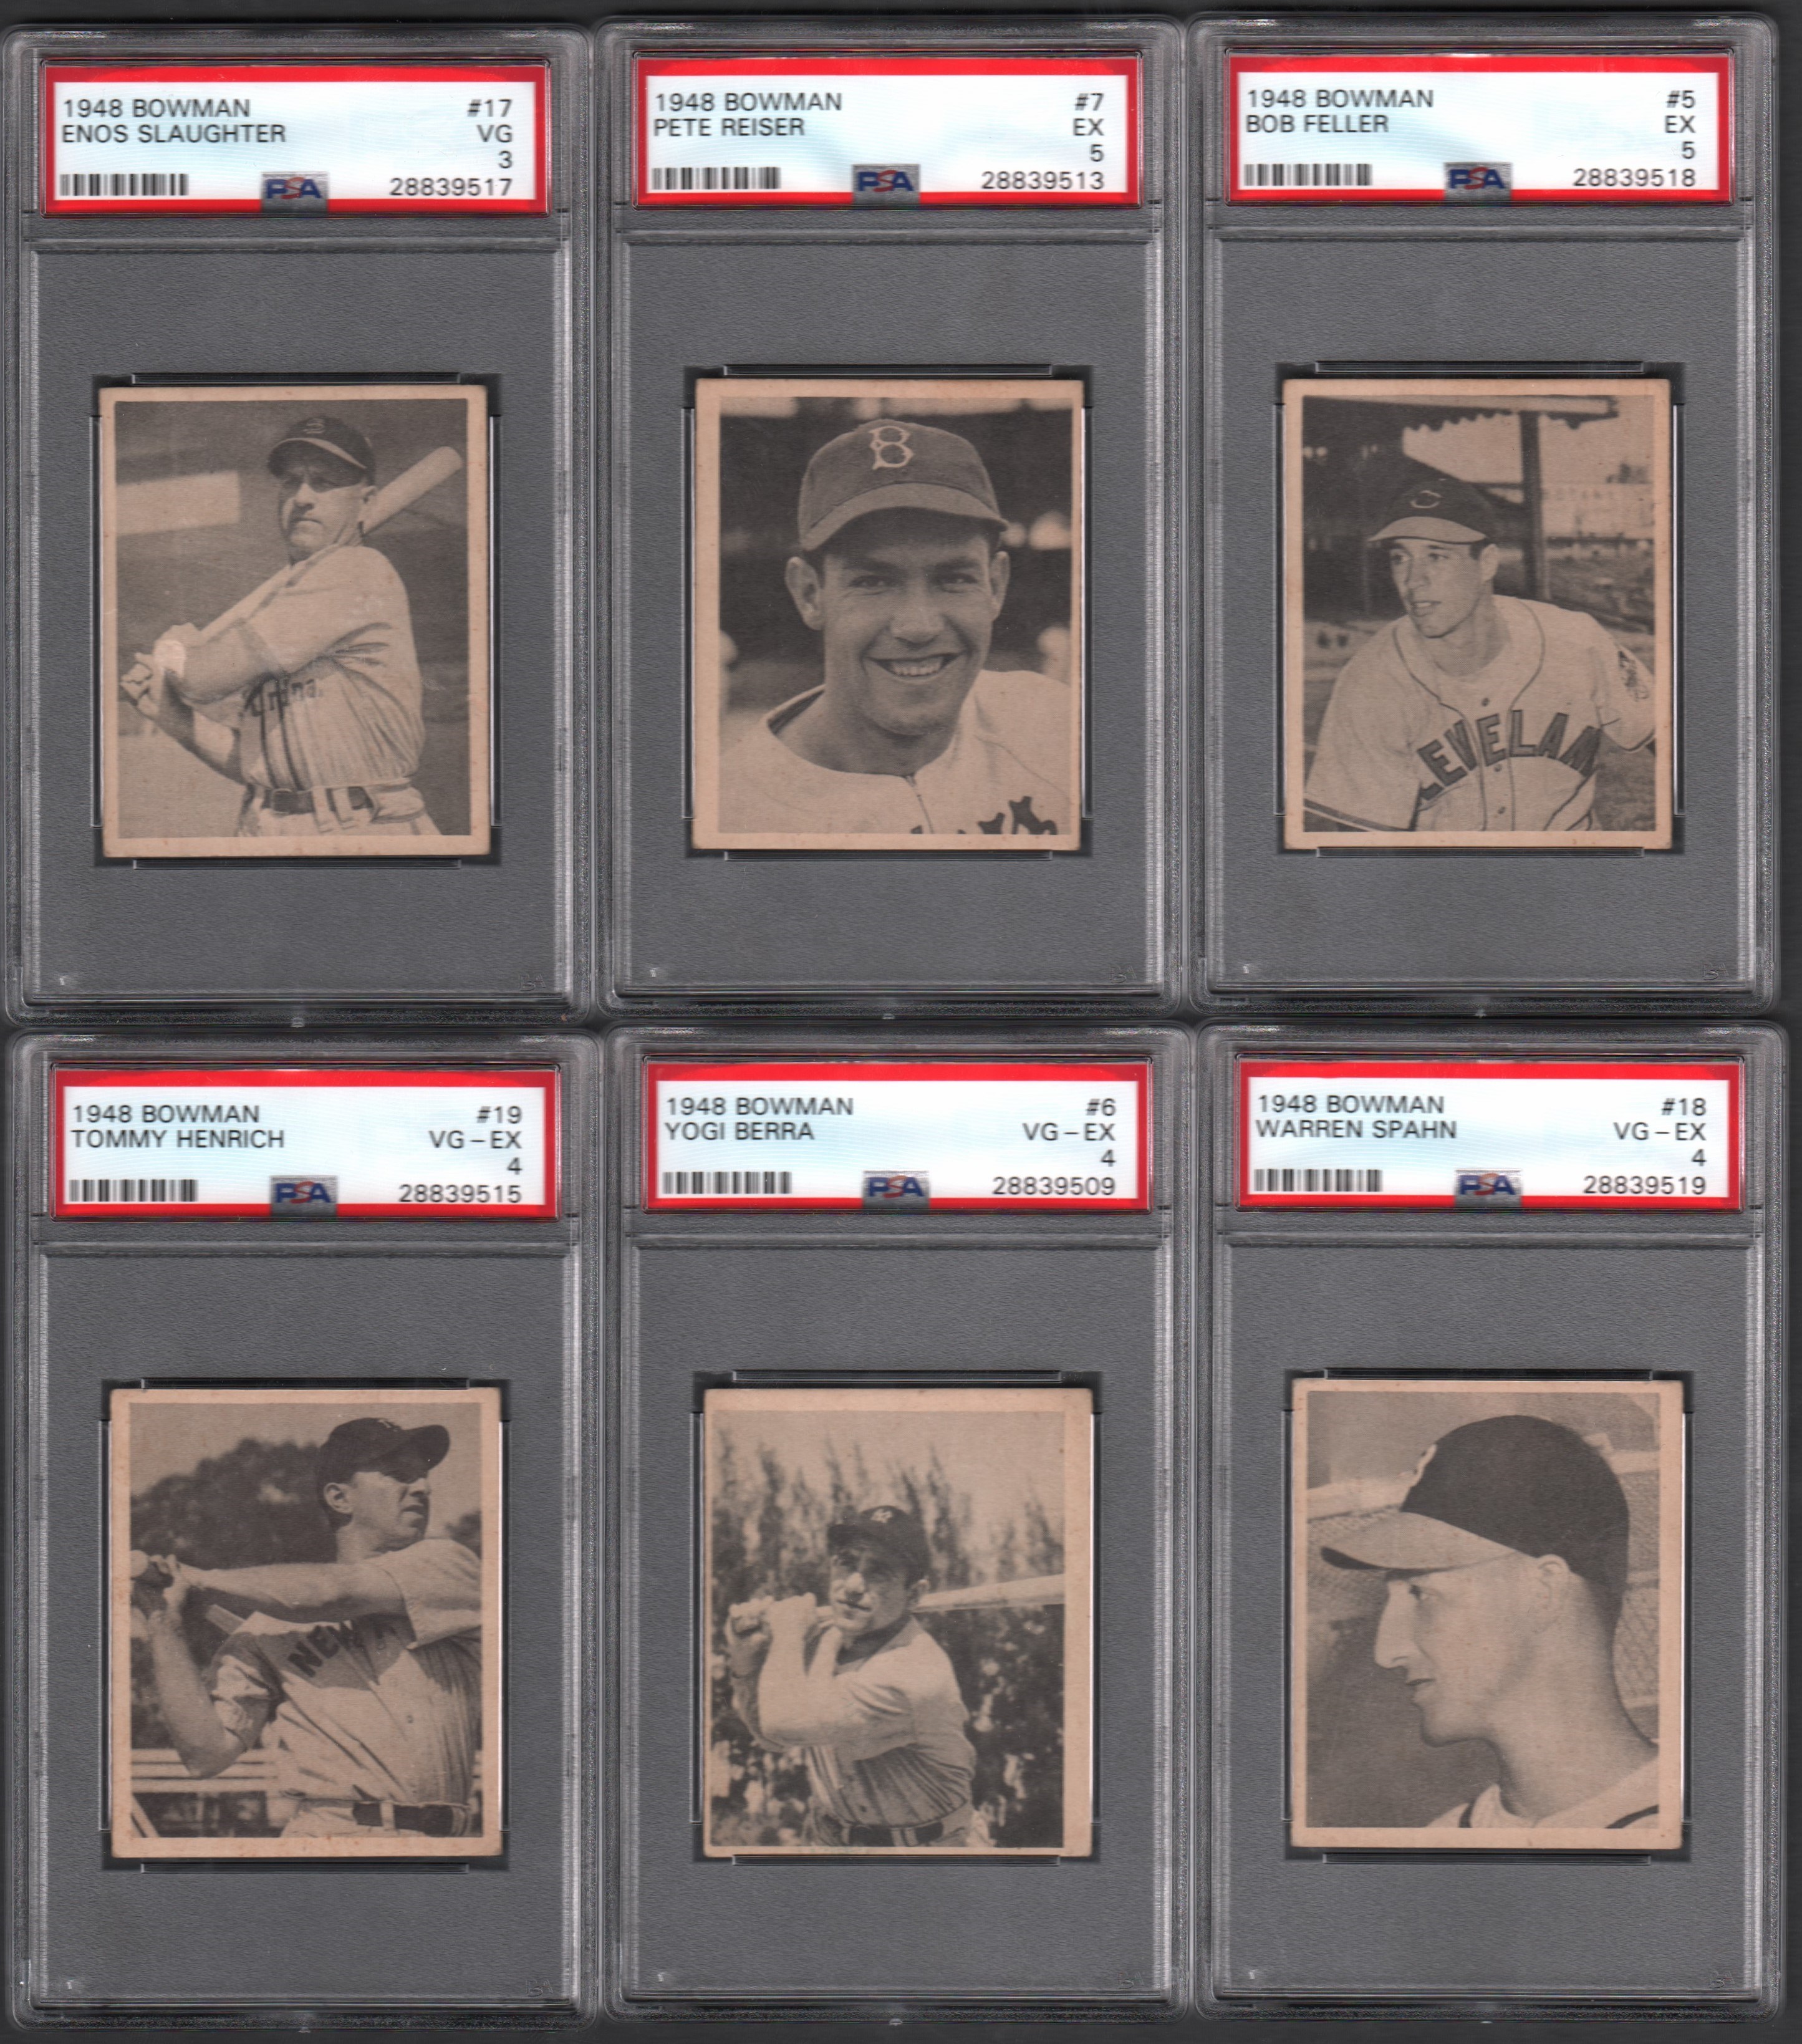 - 1948 Bowman PSA Graded Lot of (9) Cards with Berra/Feller Rookie Cards